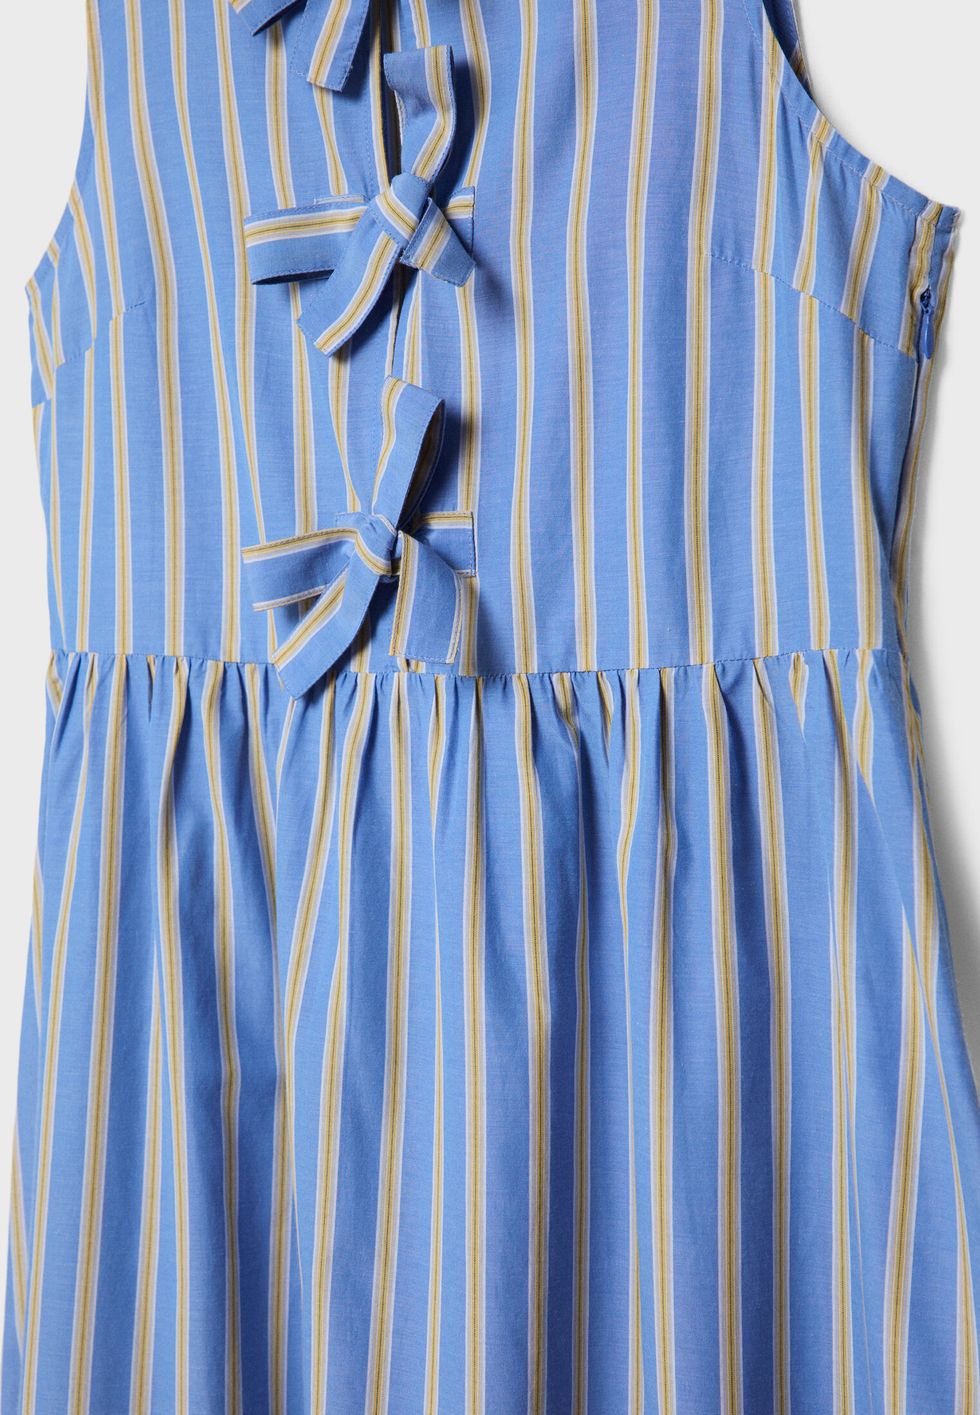 a blue and white striped shirt